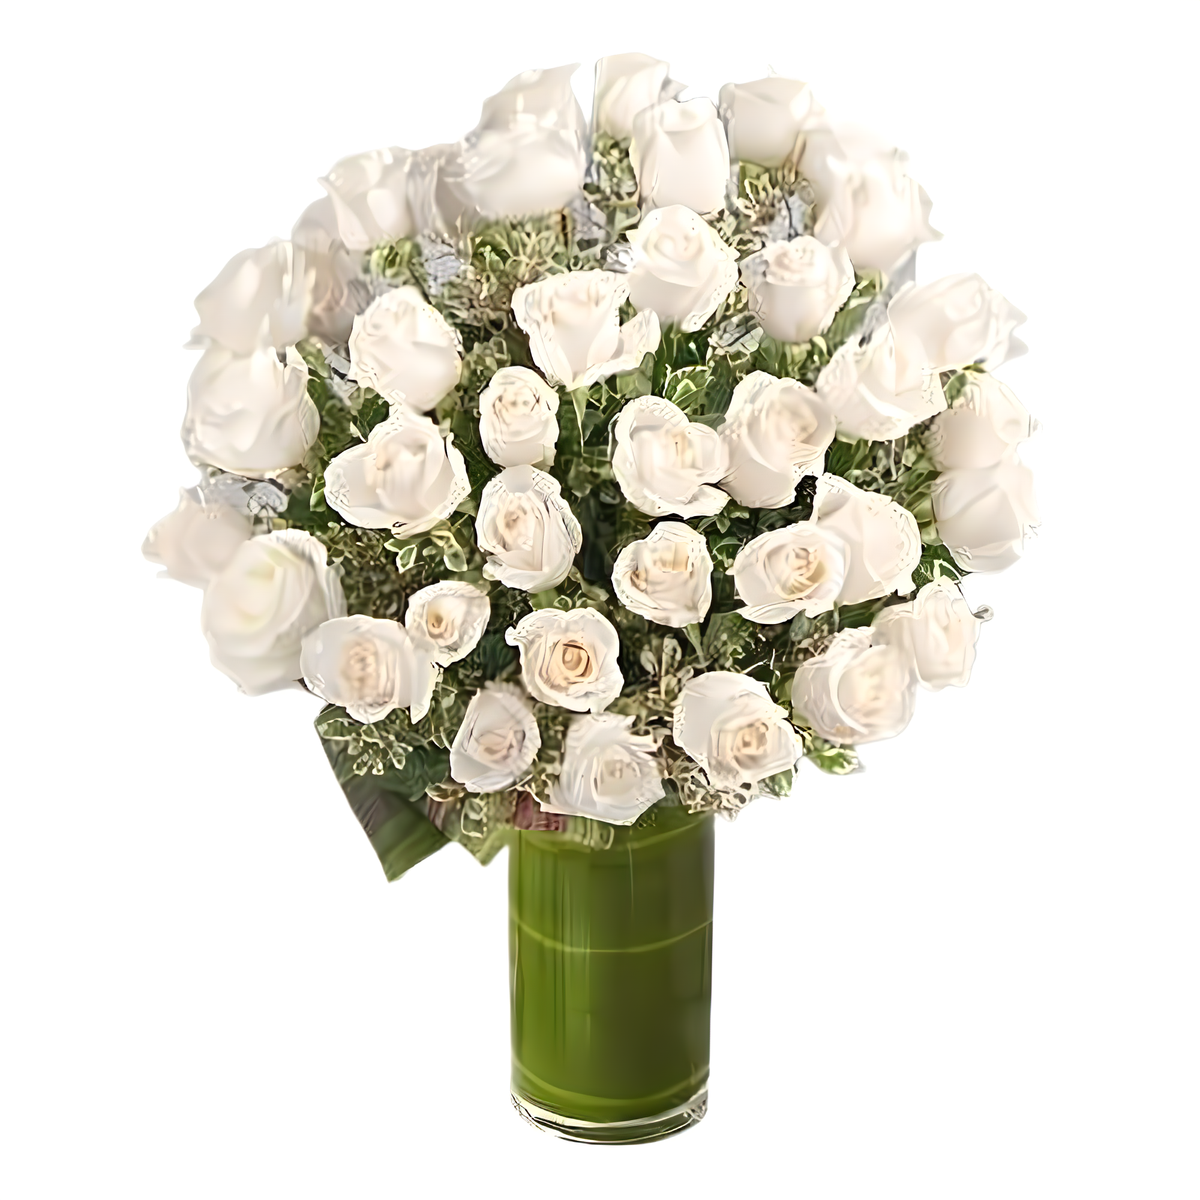 NYC Flower Delivery - Luxury Rose Bouquet - 48 Premium White Long Stem Roses - Products &gt; Luxury Collection